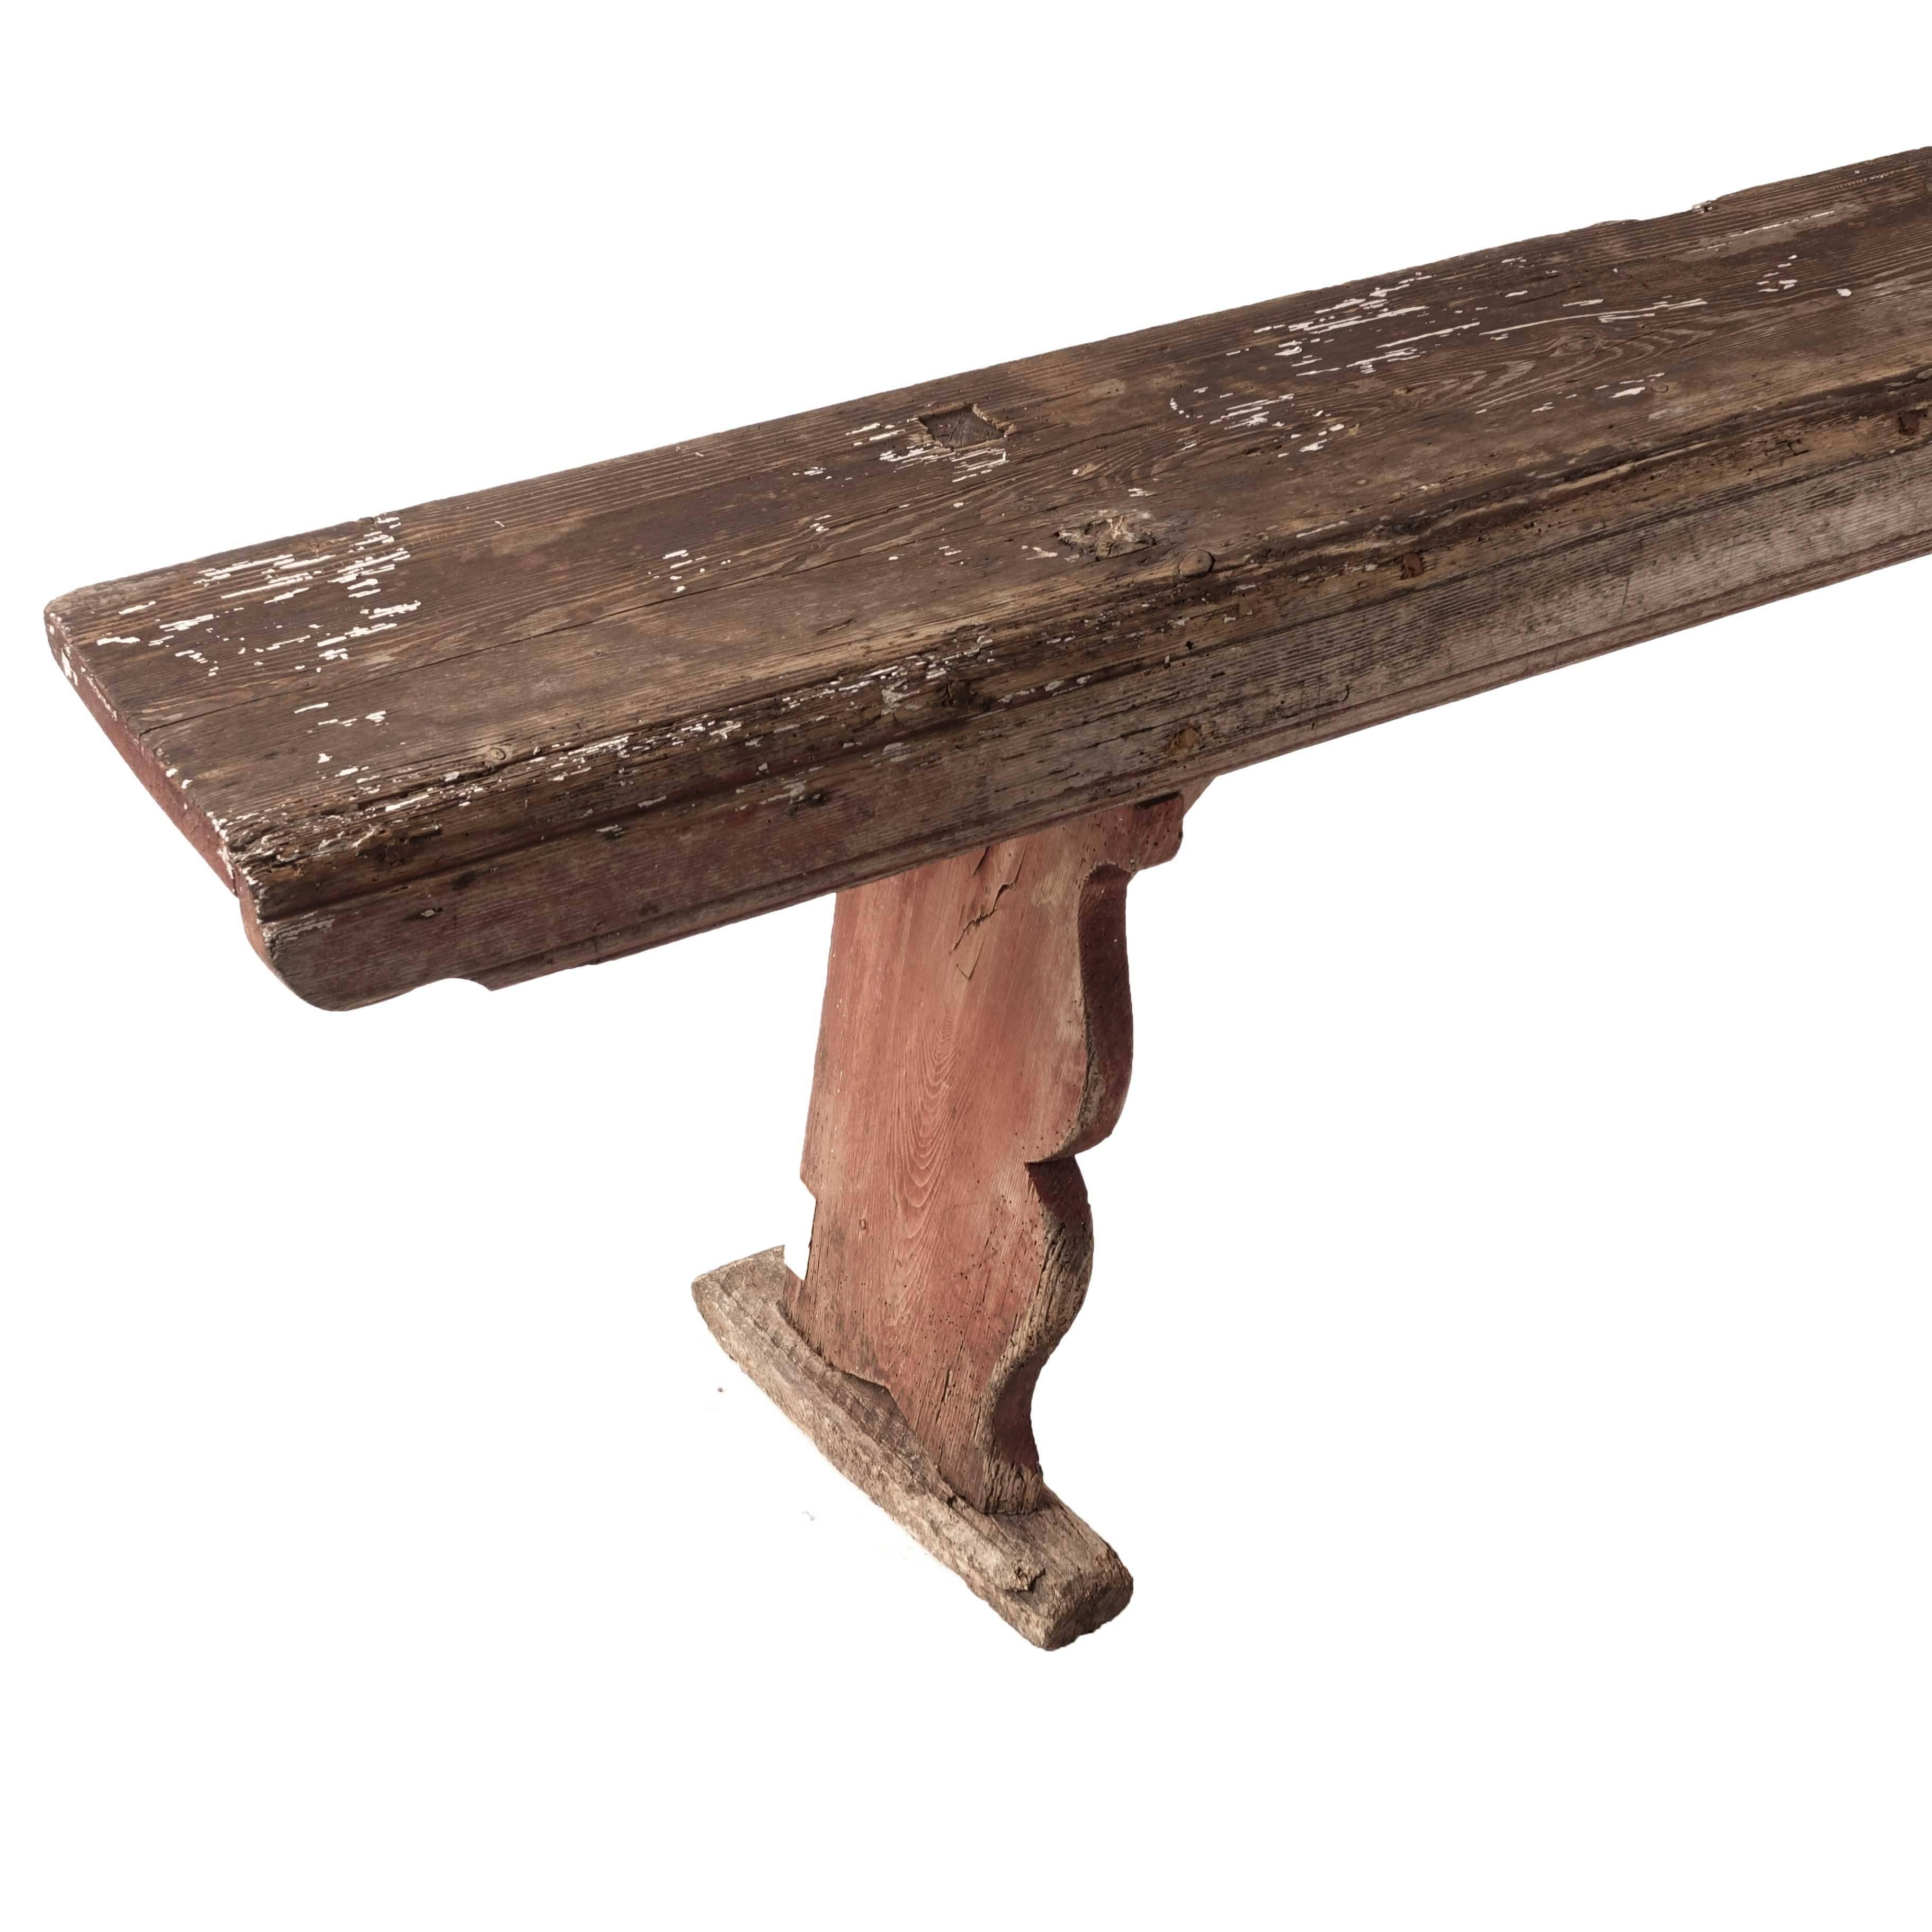 The patina of this bench is outstanding. This stunning bench should not be used for sitting, rather for decoration.